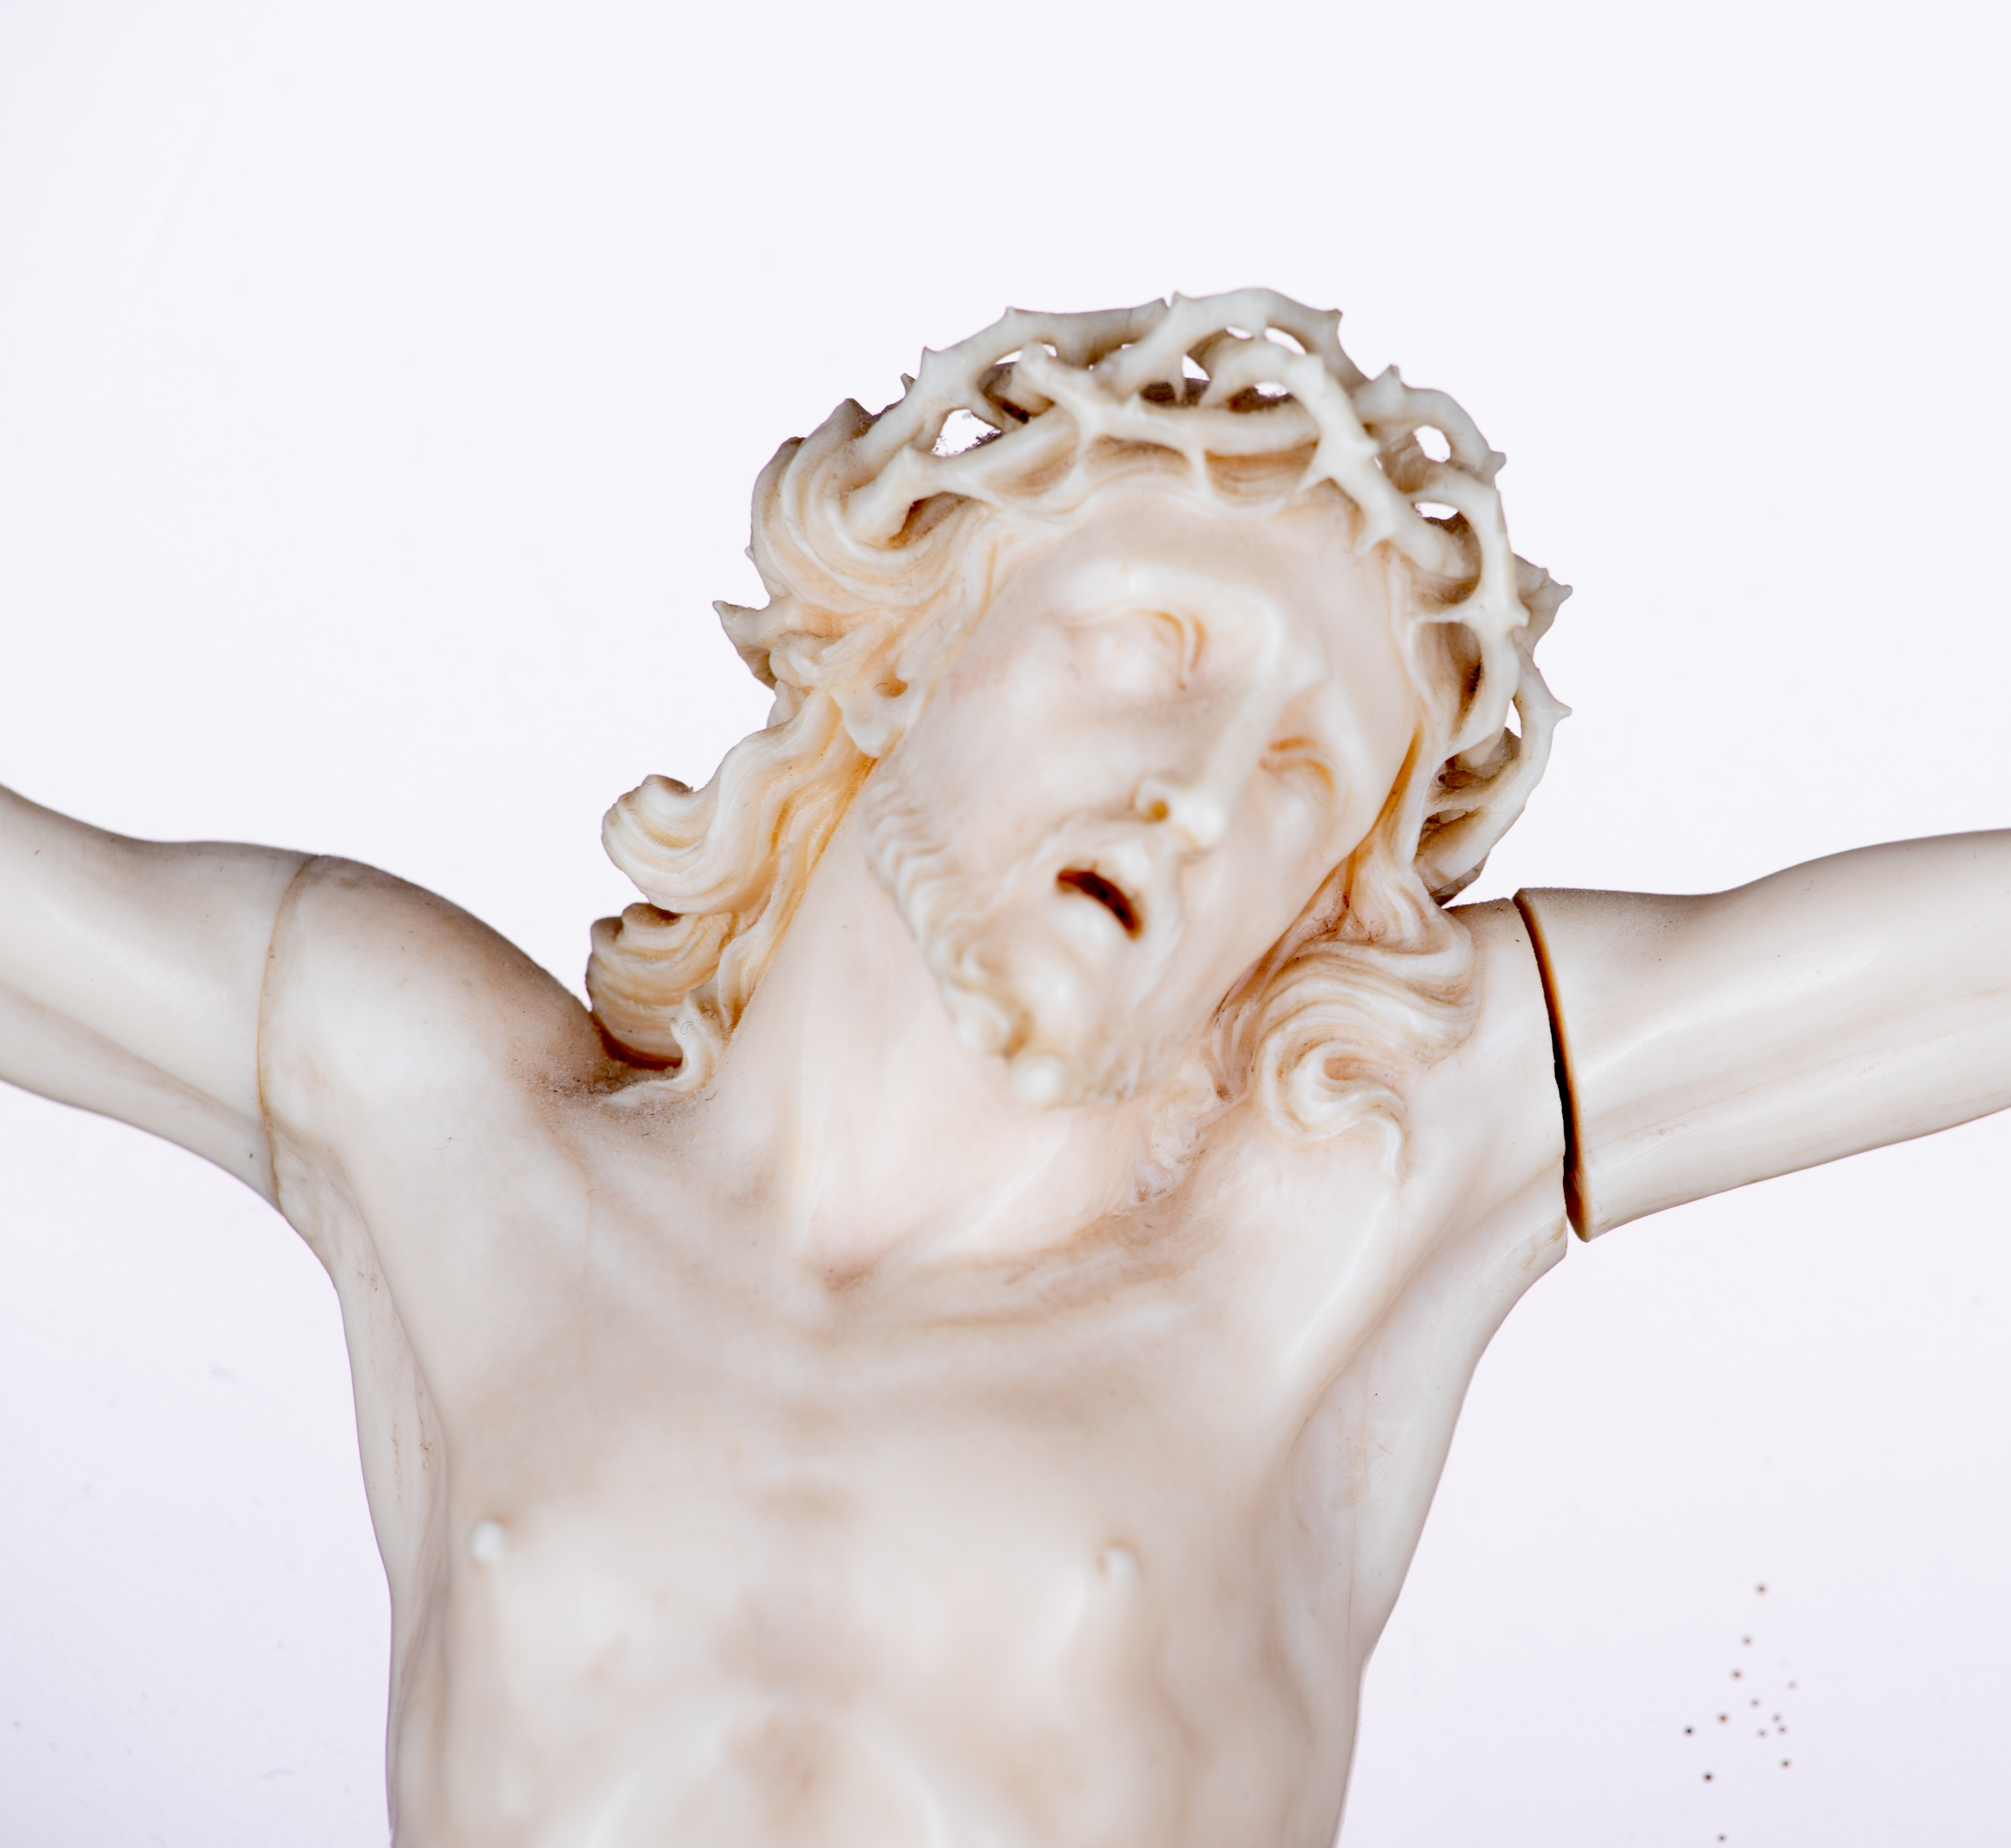 A finely sculpted ivory Corpus Christi on a plexi stand, 19thC, 20,3 x 27,5 cm (the Corpus Christi) - Image 3 of 8